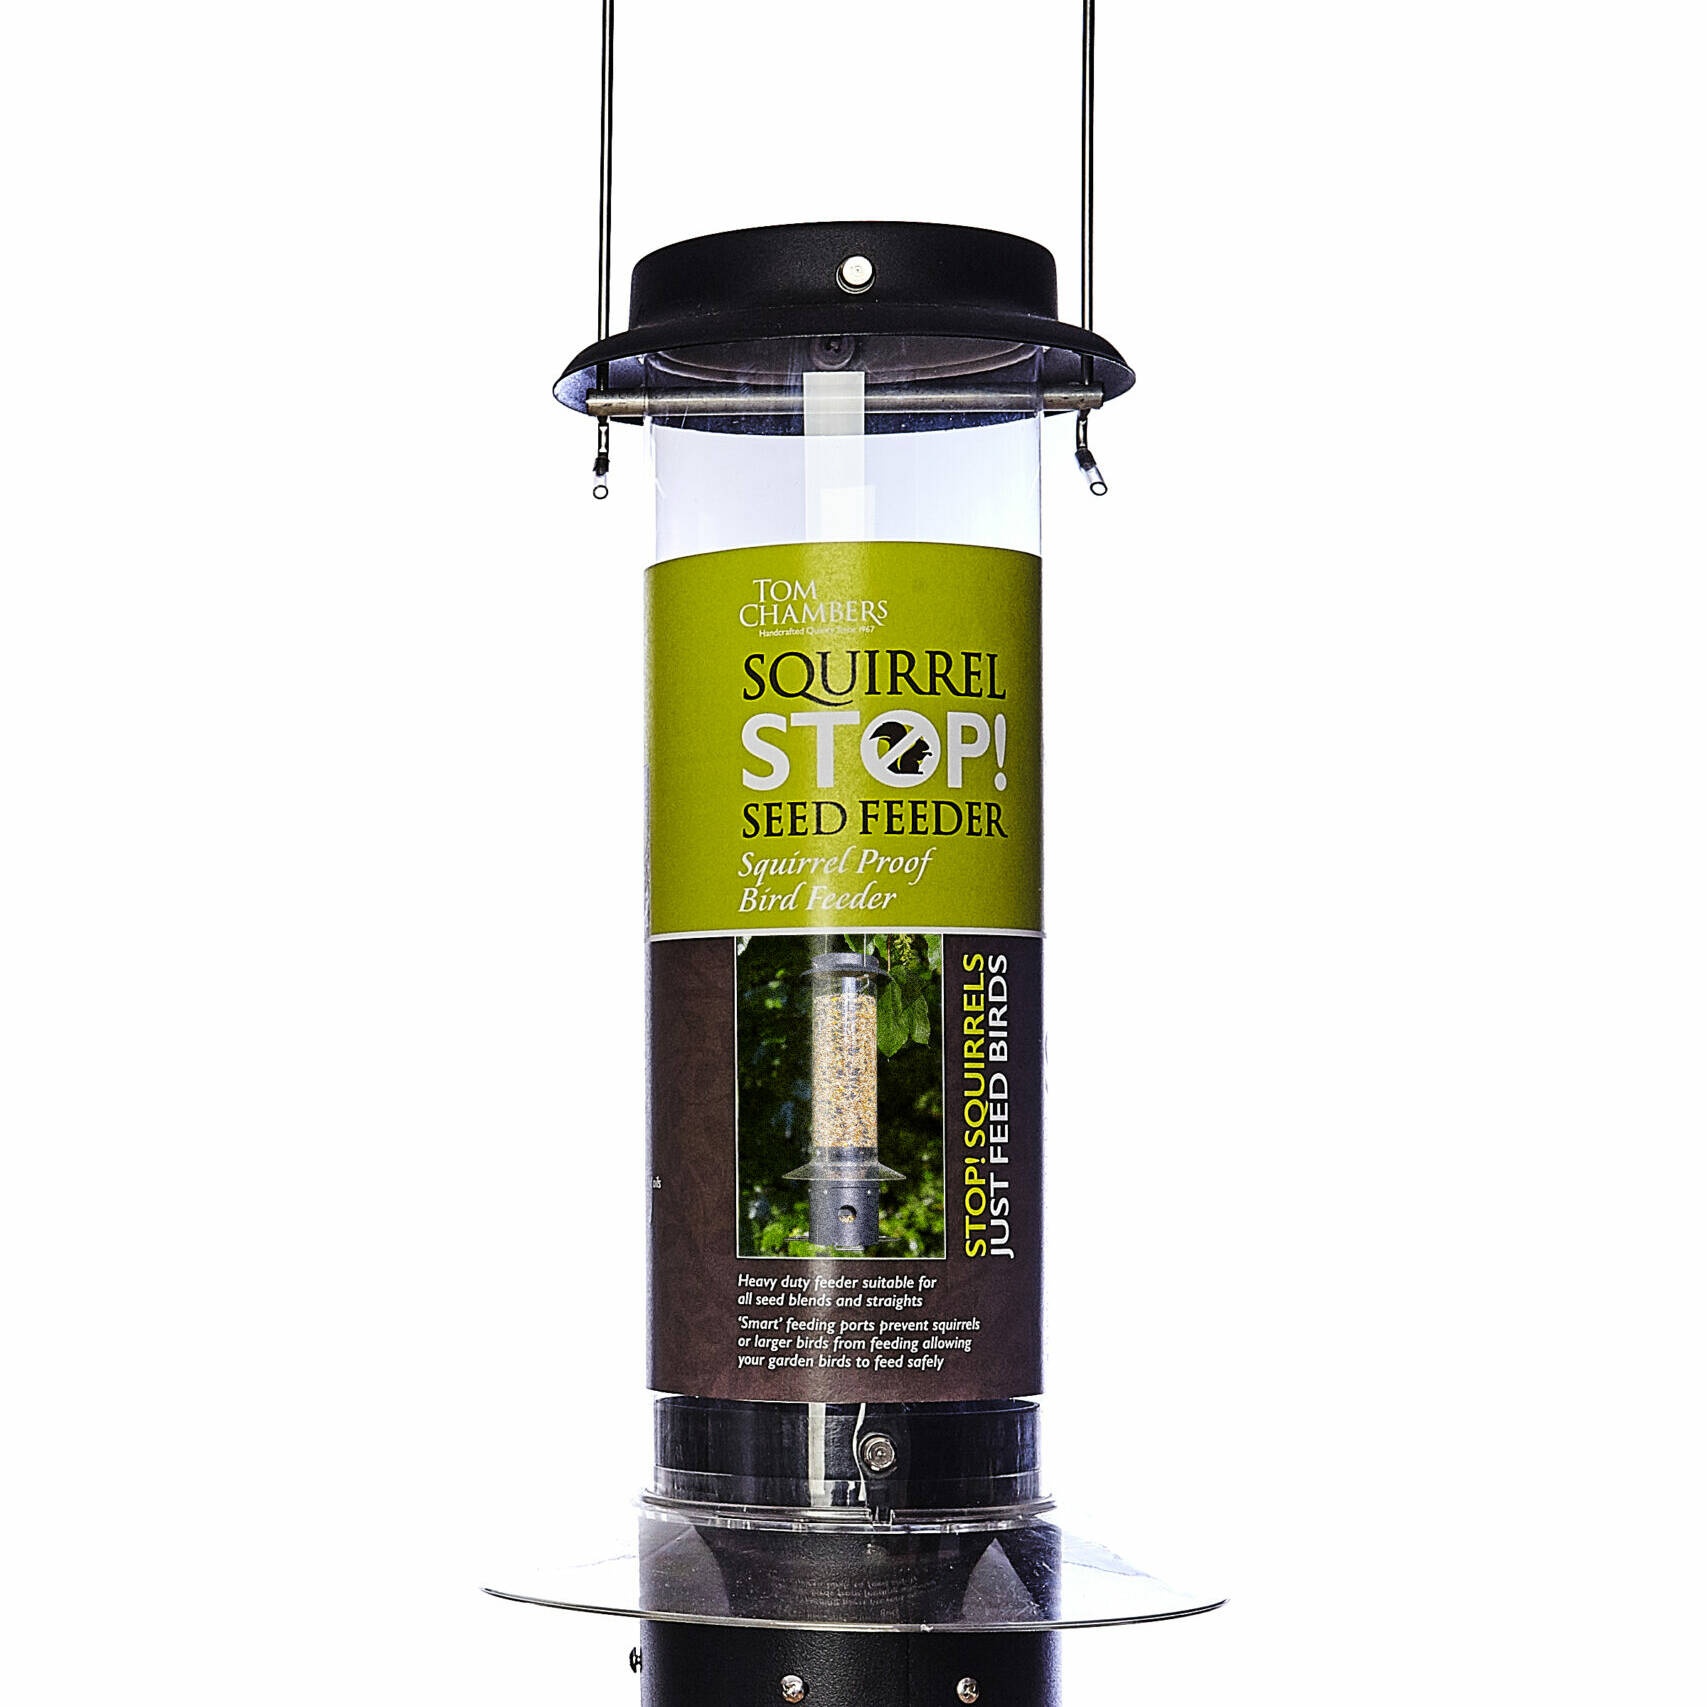 Tom chambers Squirrel Stop Seed Feeder